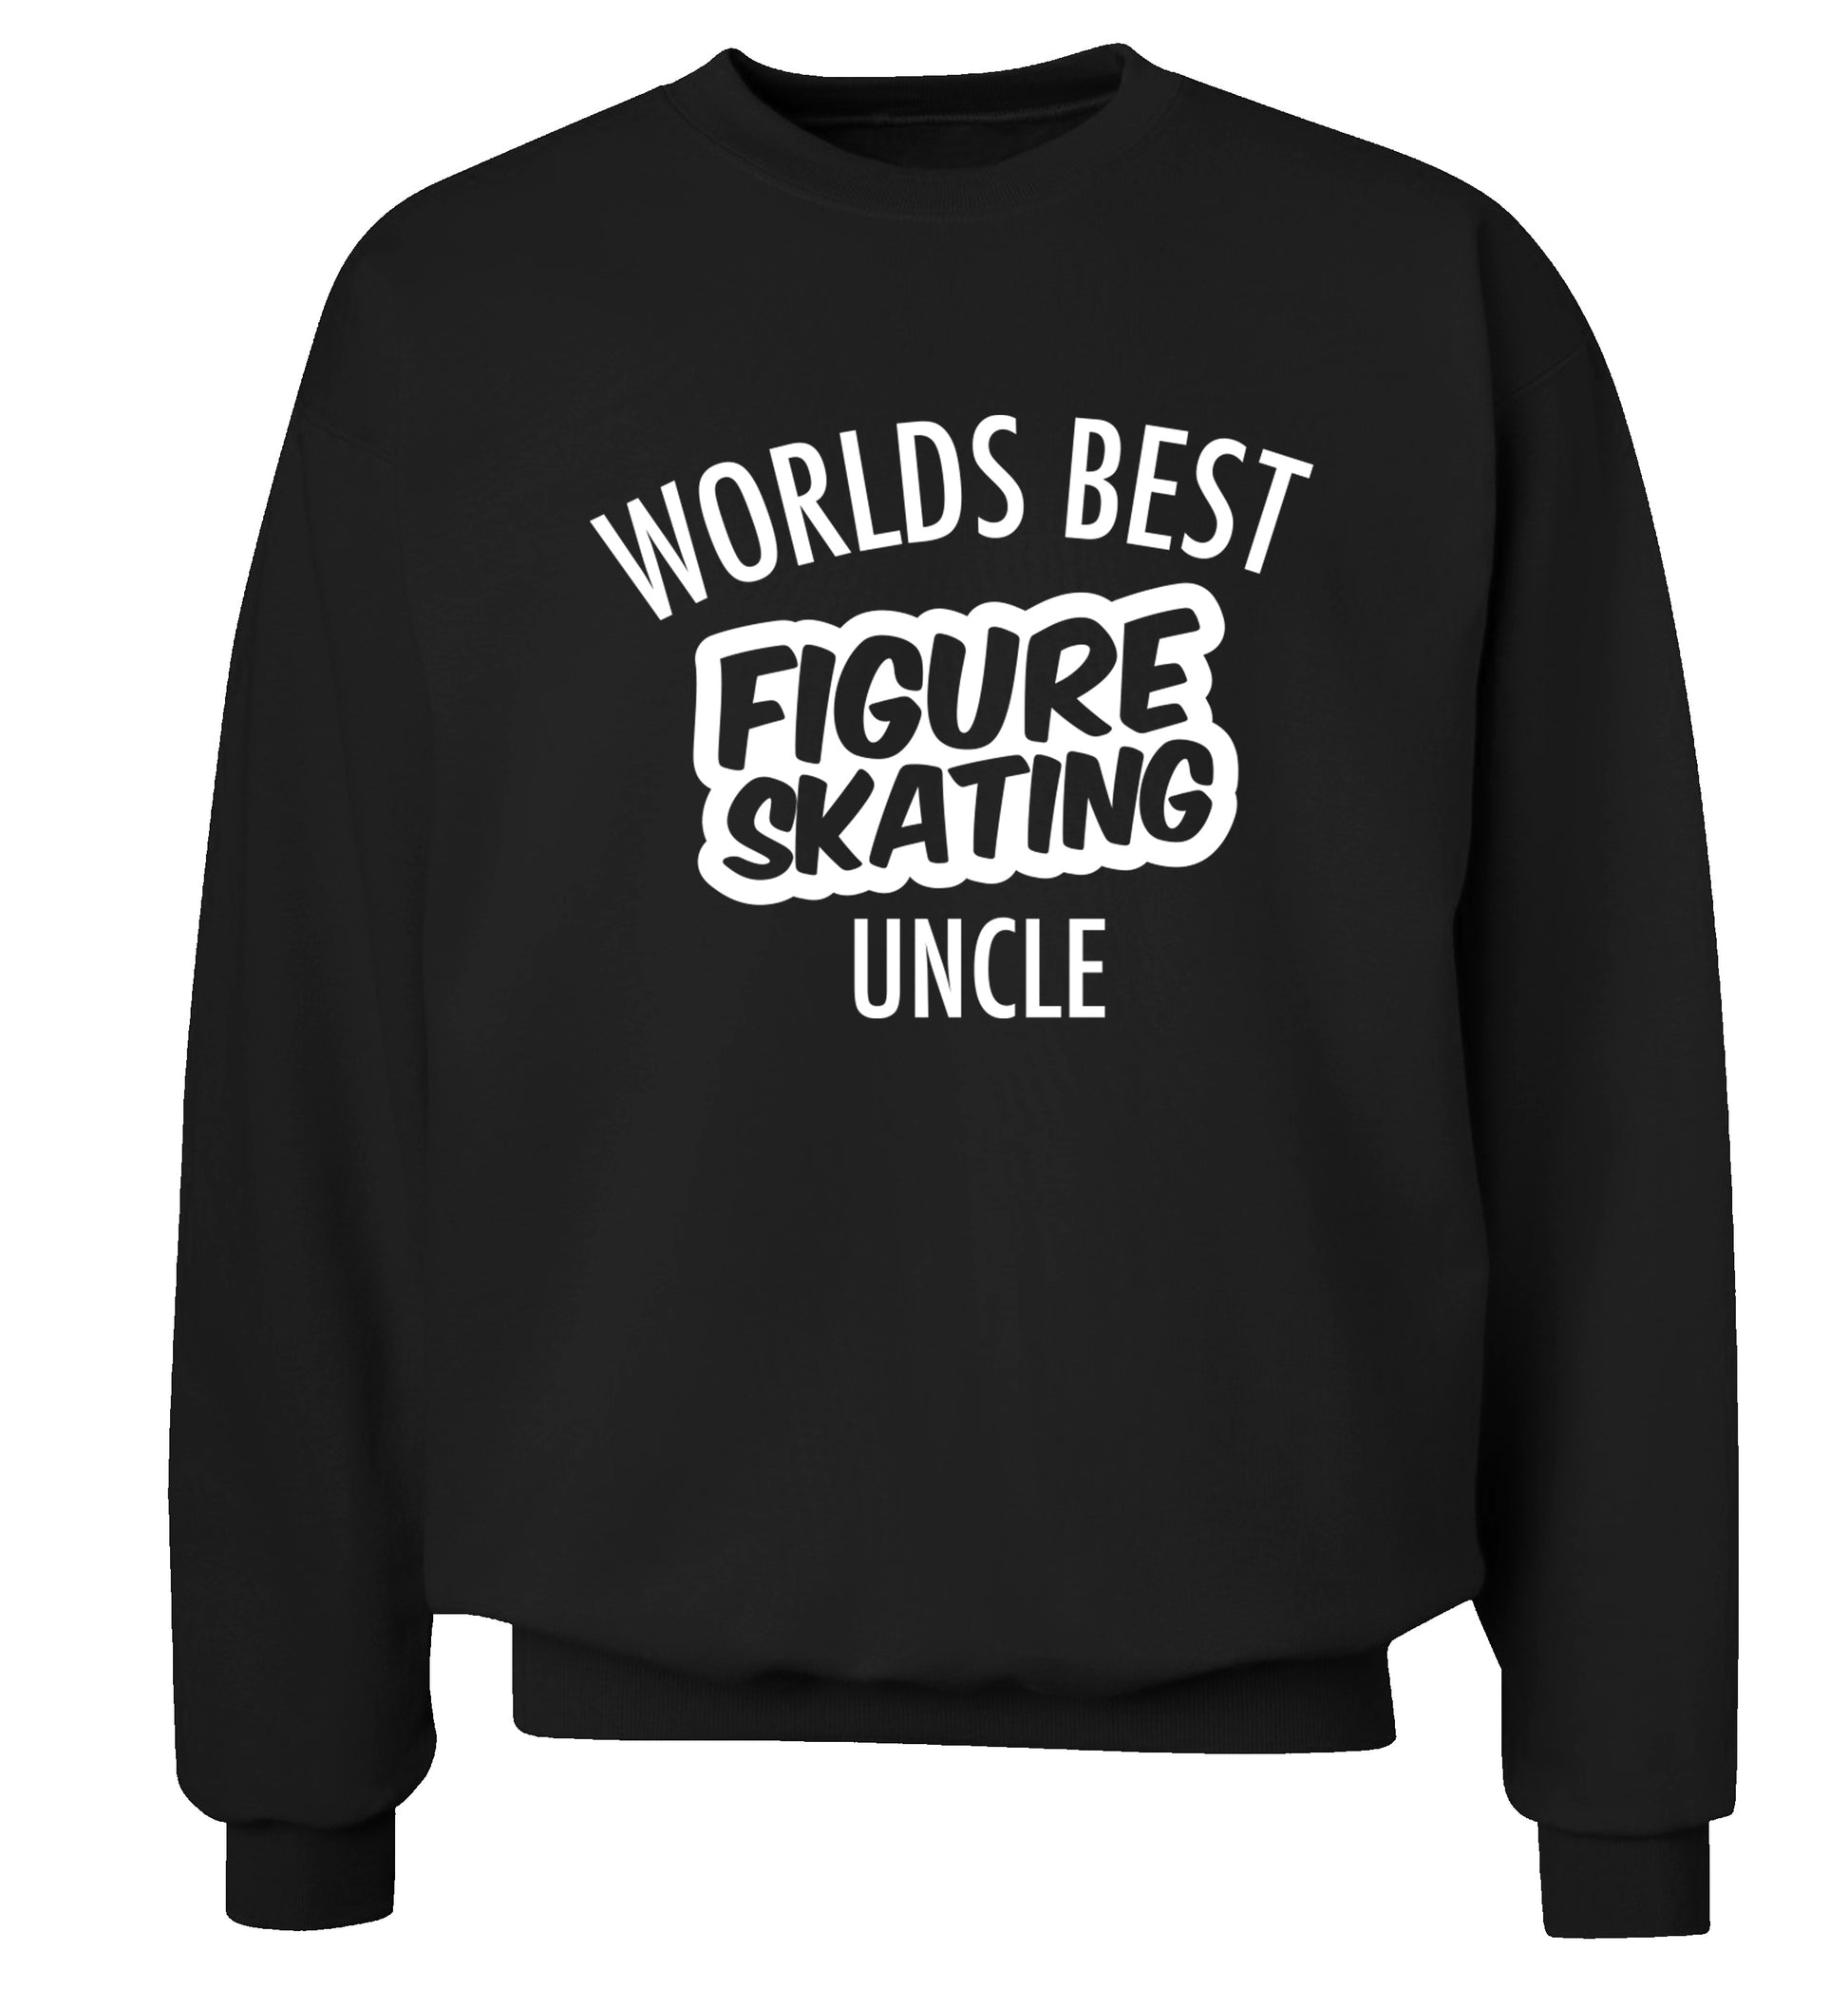 Worlds best figure skating uncle Adult's unisexblack Sweater 2XL